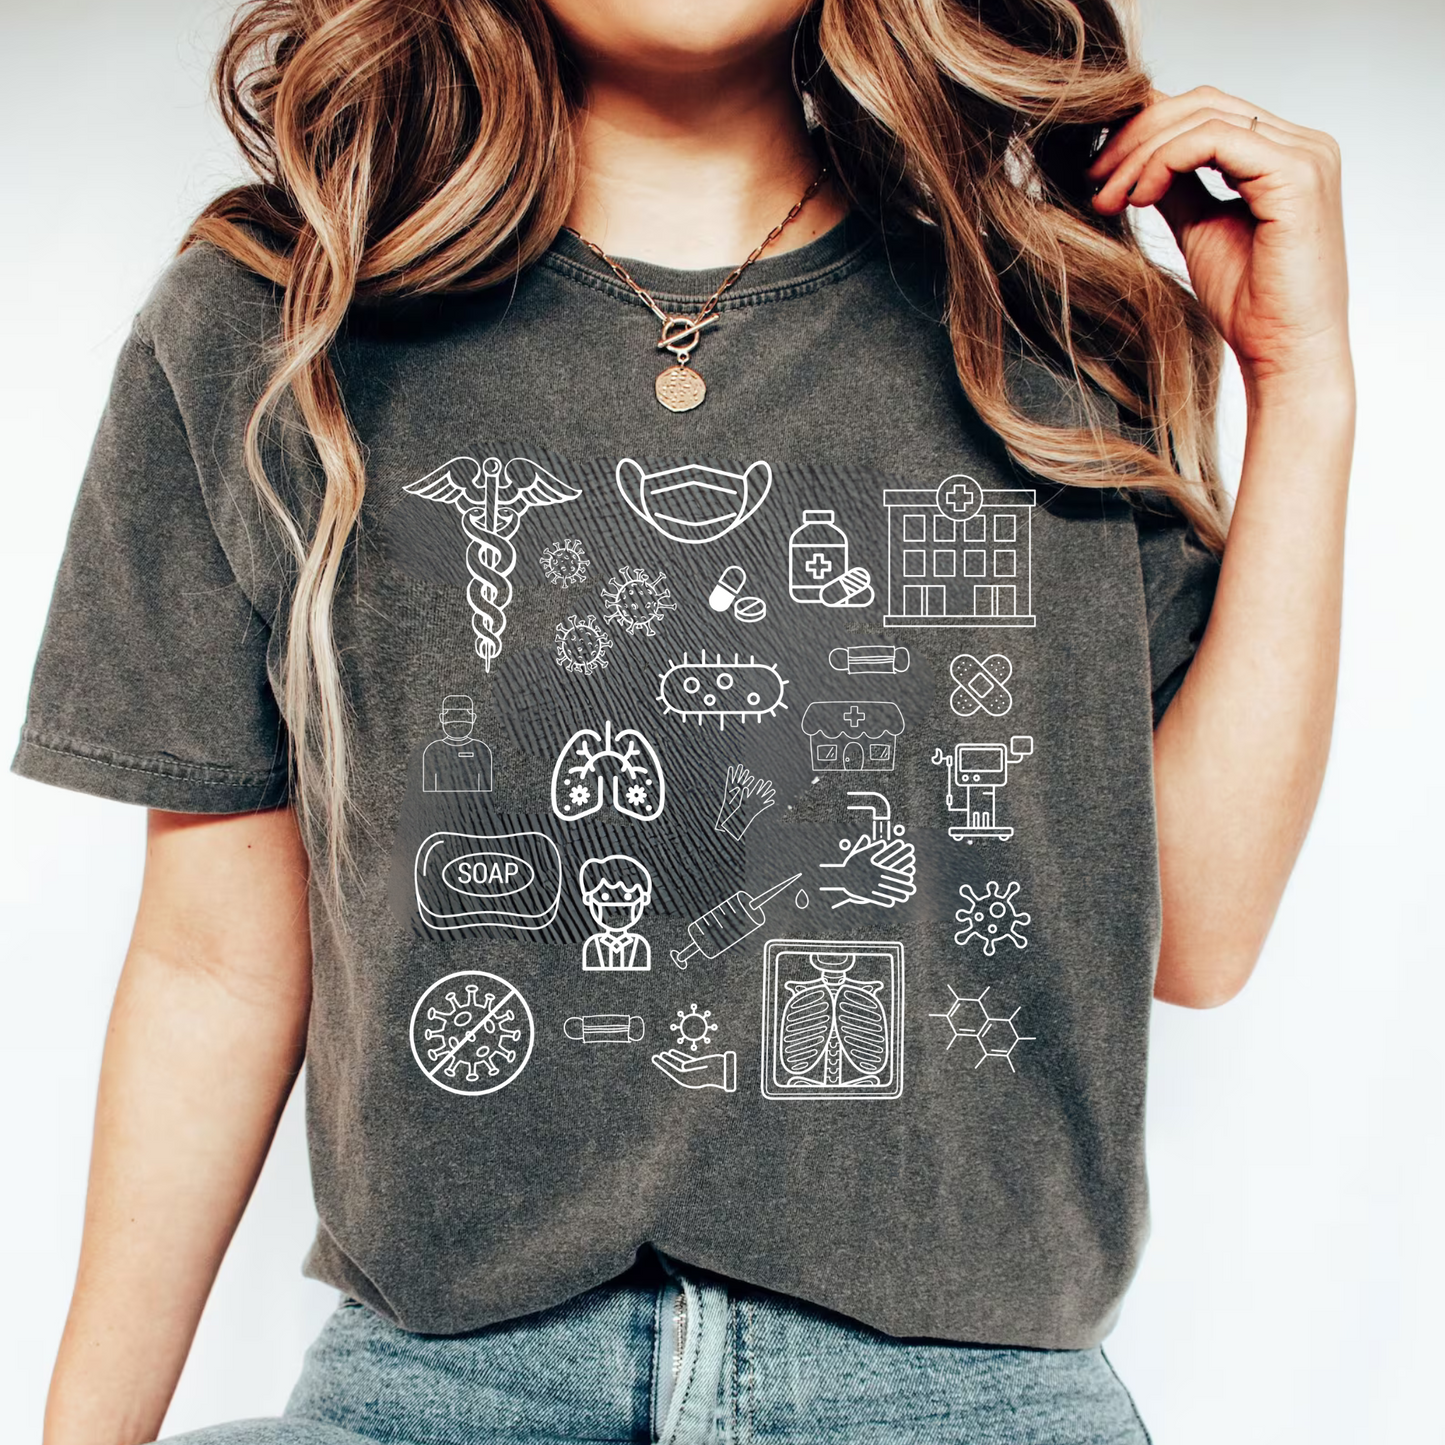 Infectious Disease Doodle Drawing shirt, Gift for ID Doctor, Microbiology, Epidemiology, Public Health, ID Specialist, Pepper Shirt